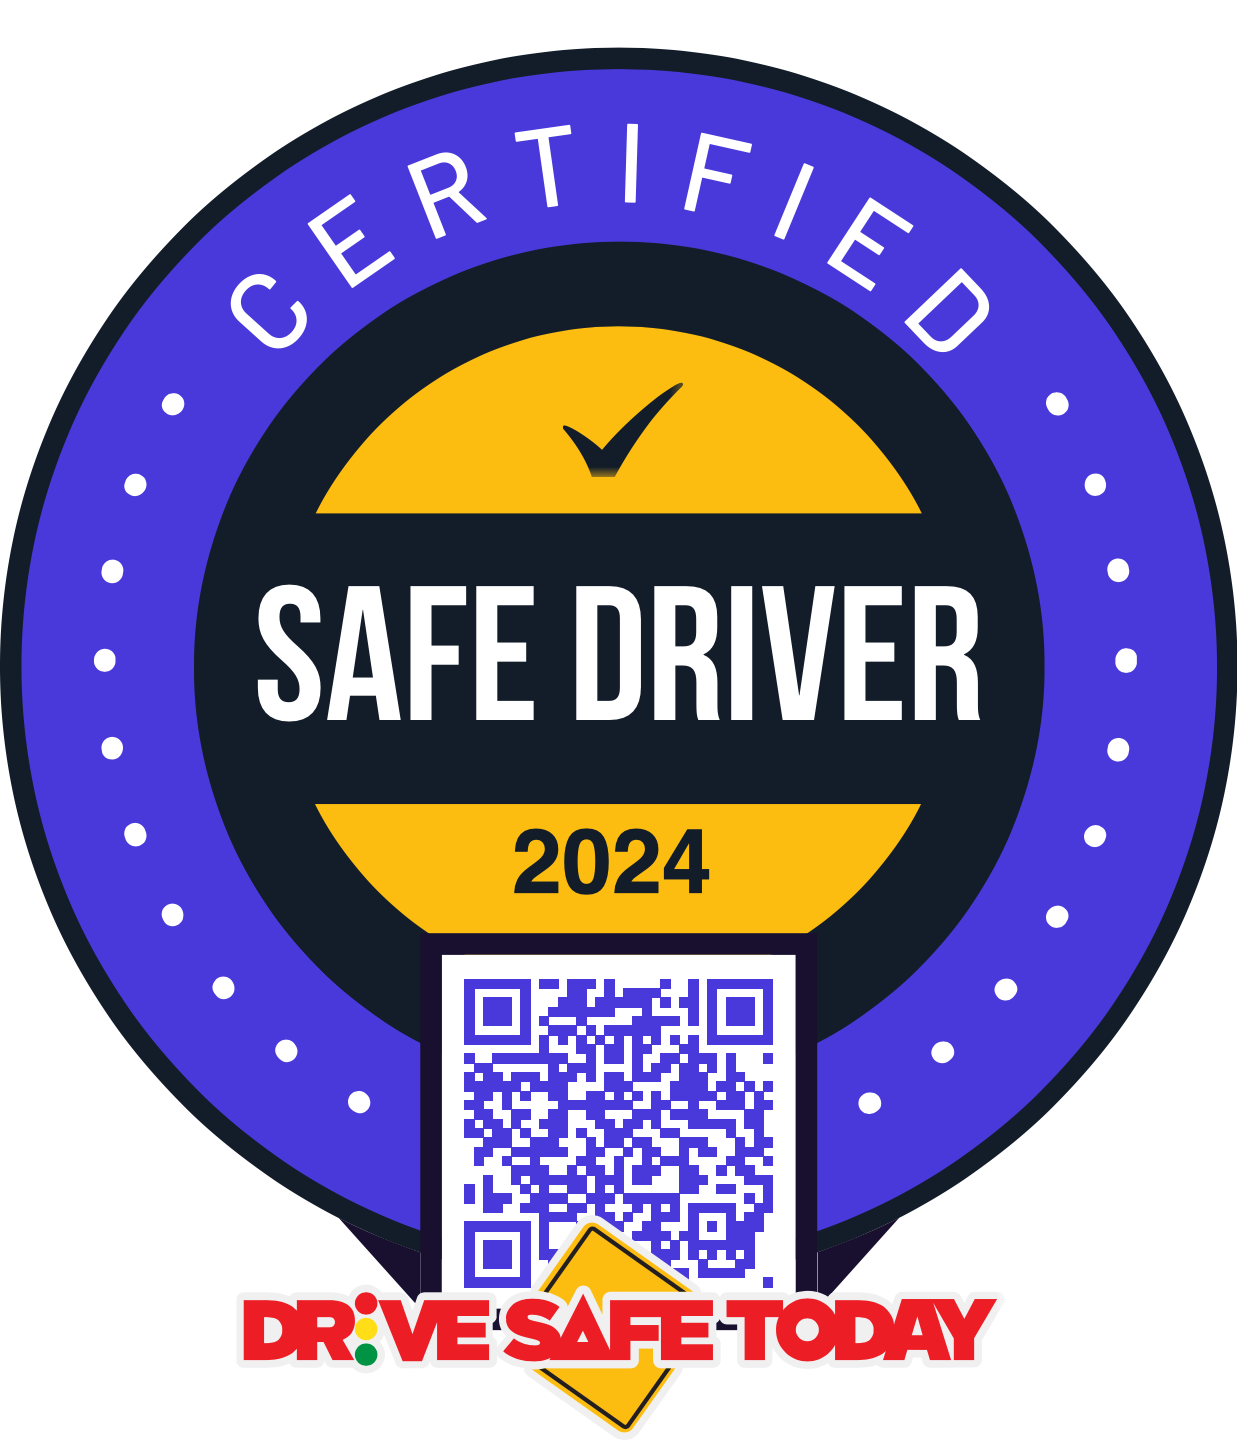 Certified Safe Drivier Seal provided by DriveSafeToday on course completion